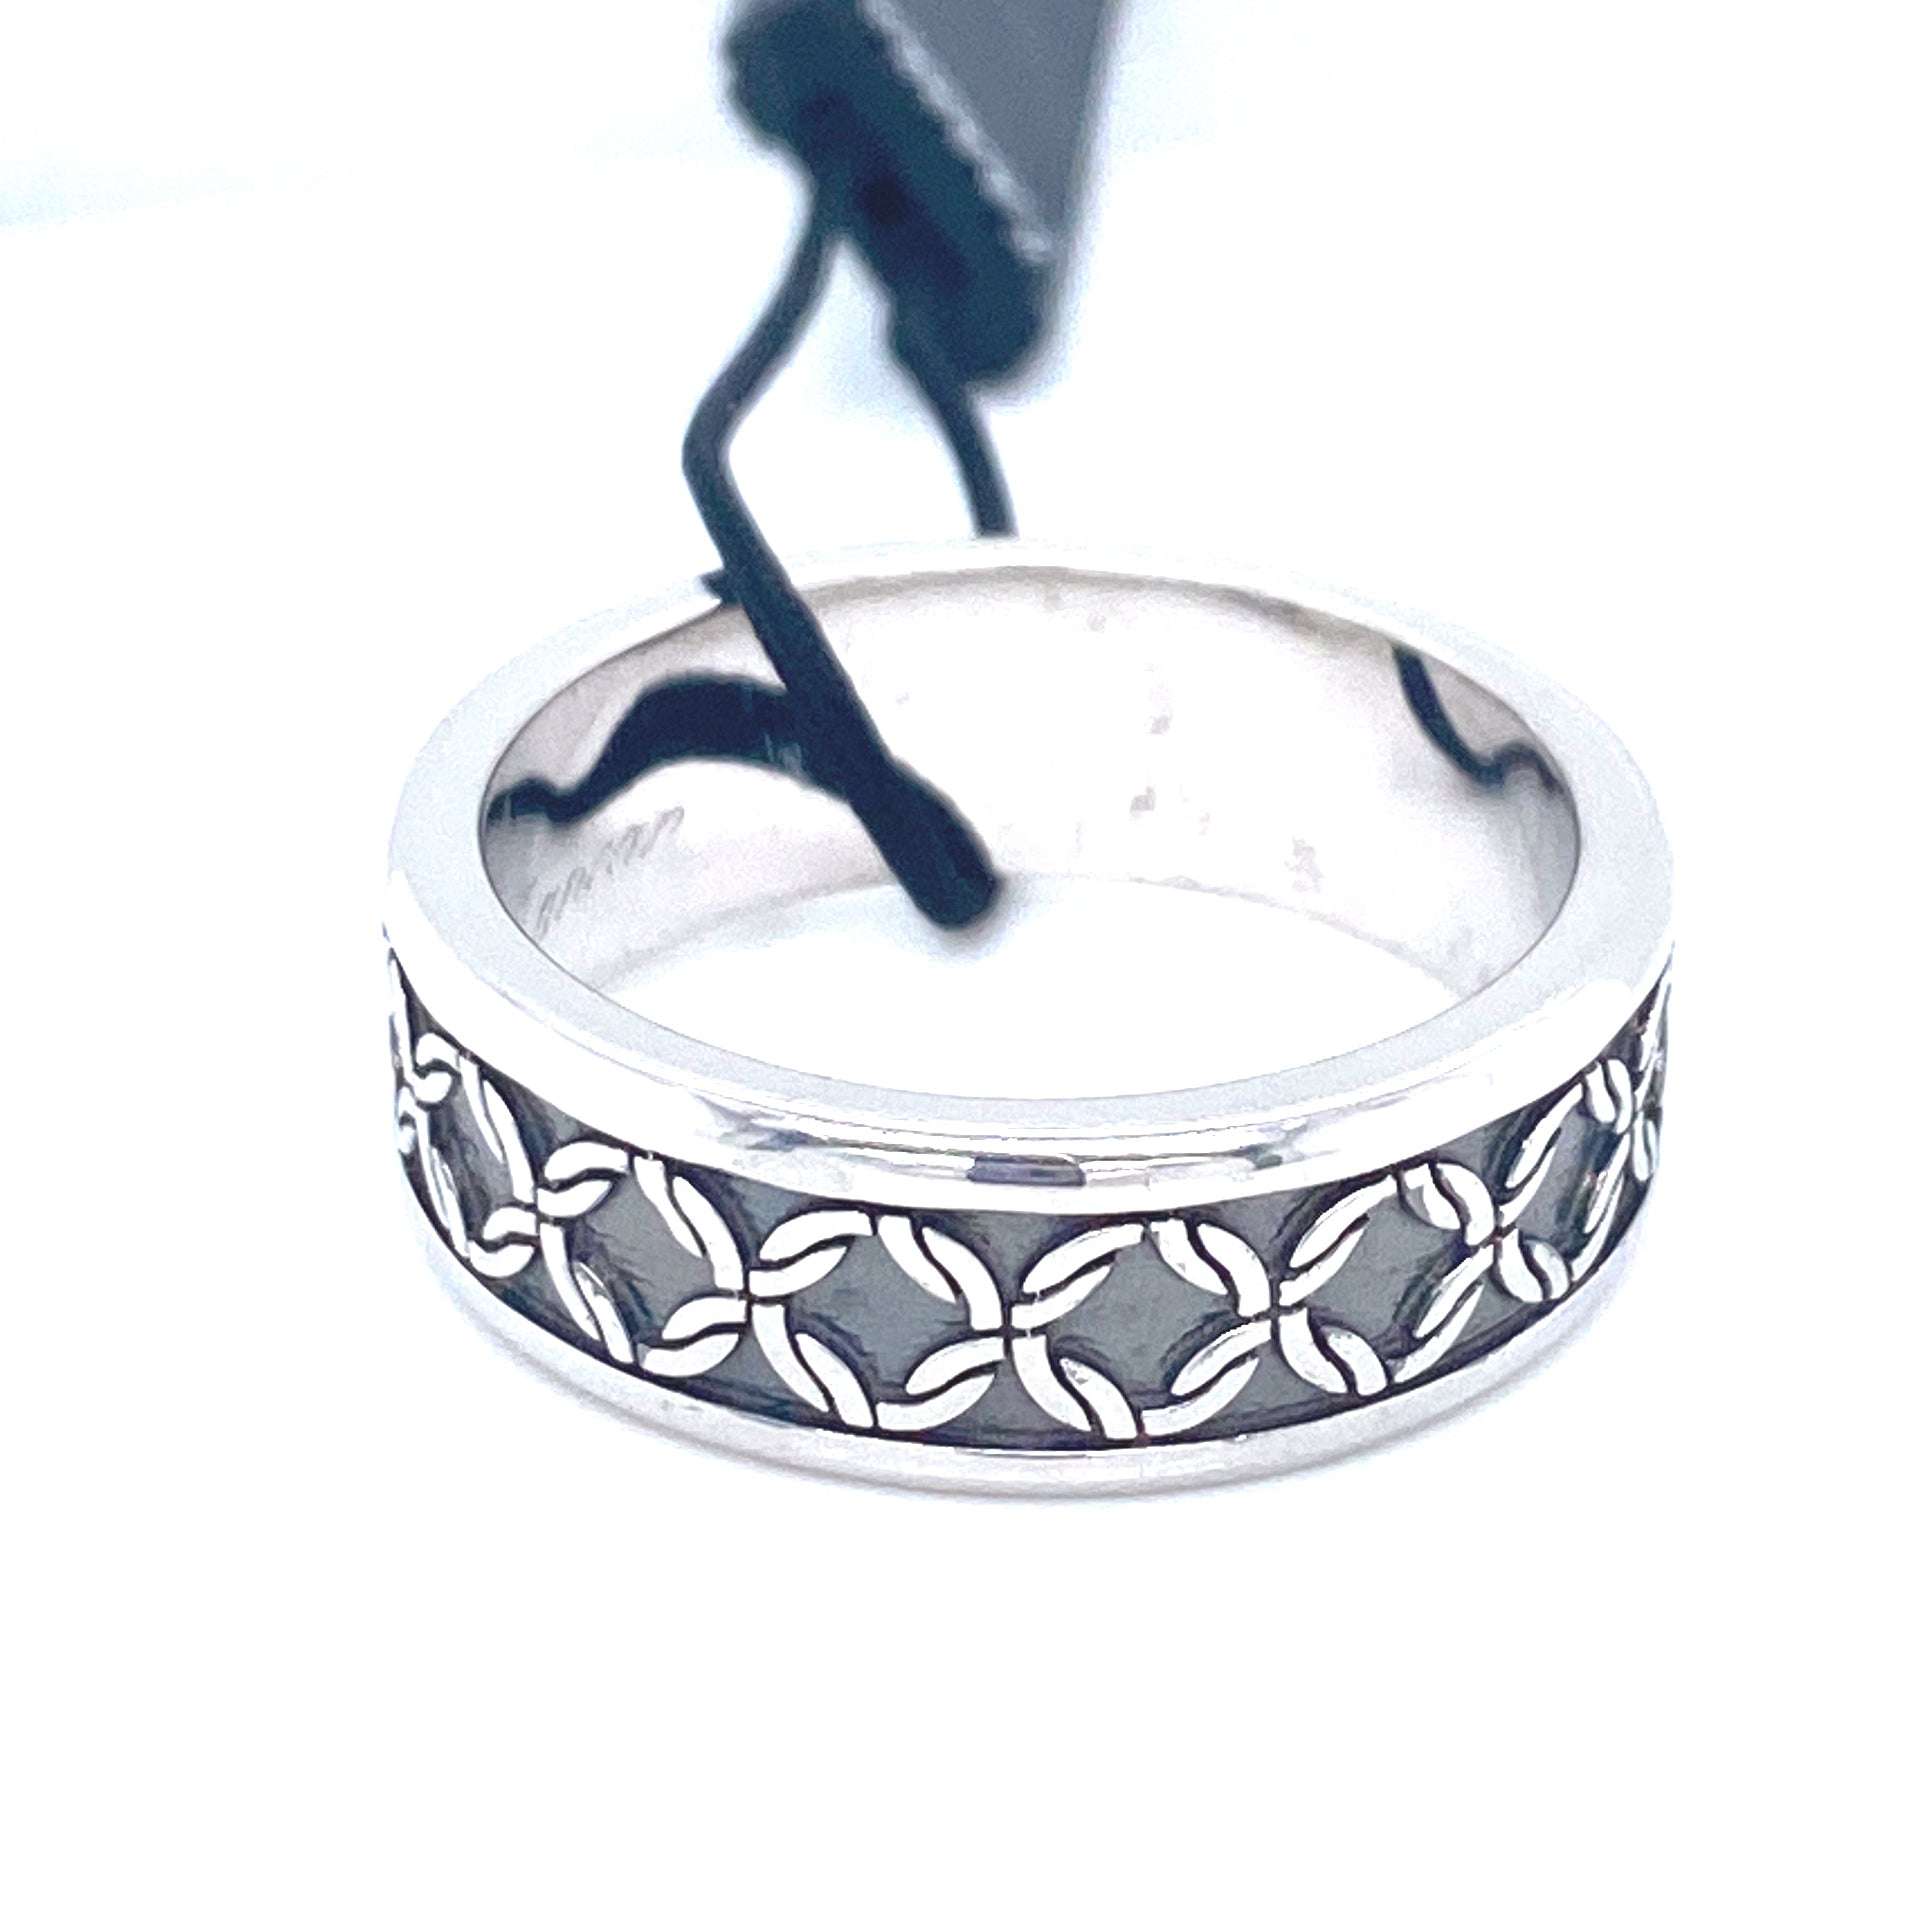 Men's Silver Rope Patterned Wedding Ring | Zancan | Luby 